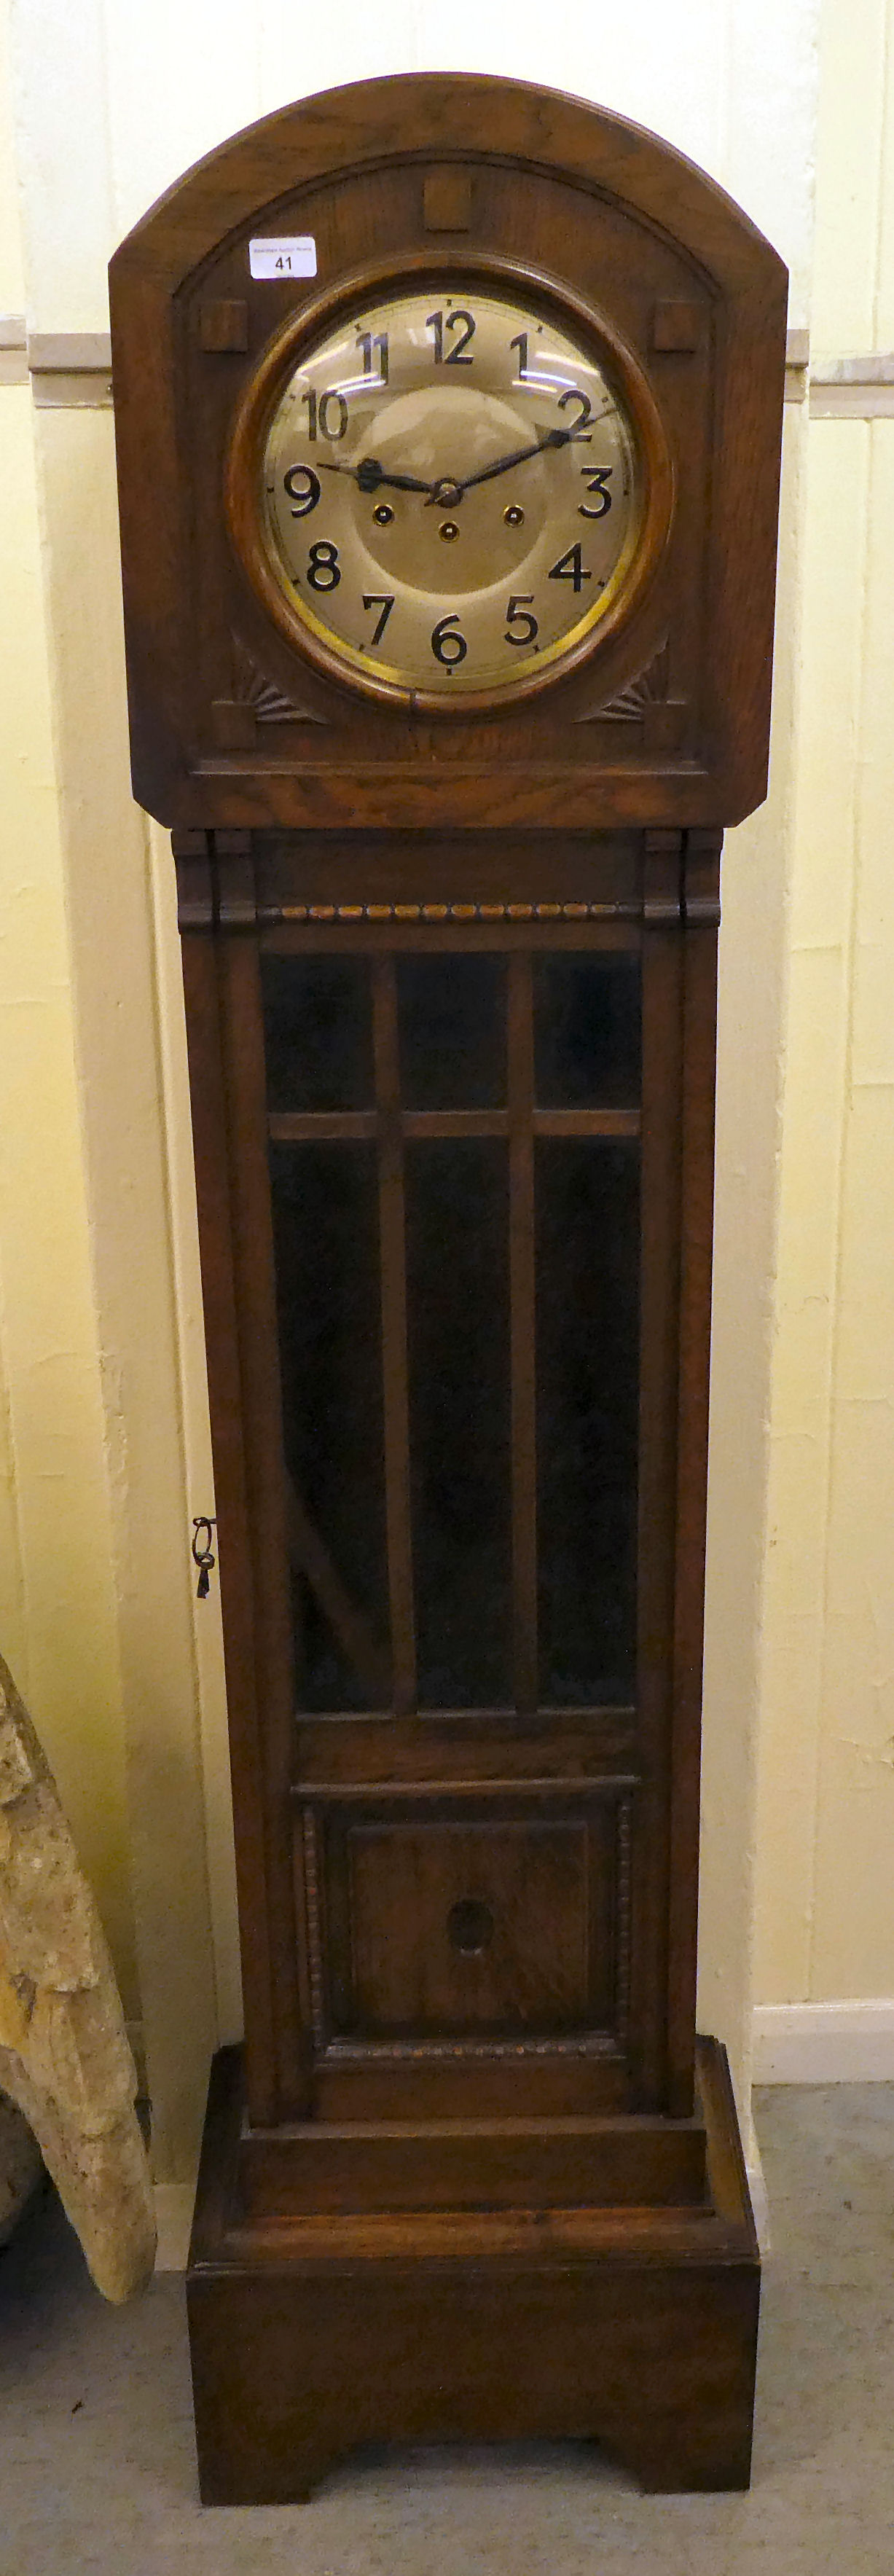 A mid 20thC oak longcase clock with a pointed arch top, over a convex circular window and a bevelled